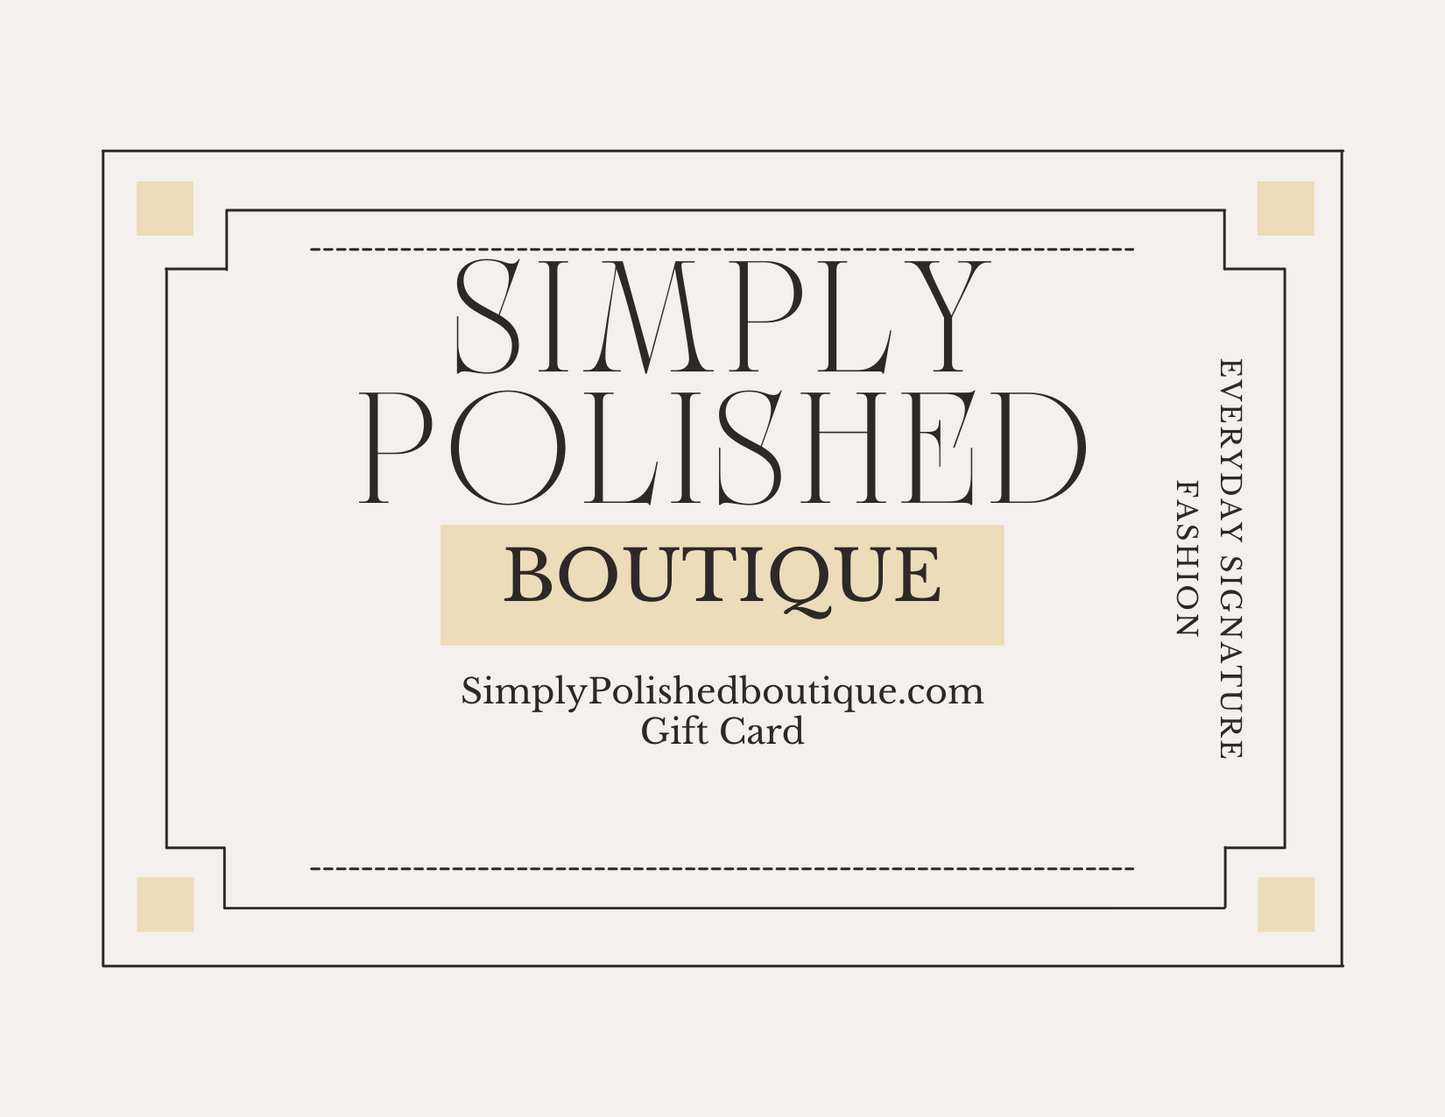 Simply Polished Boutique Giftcards - Simply Polished Boutique